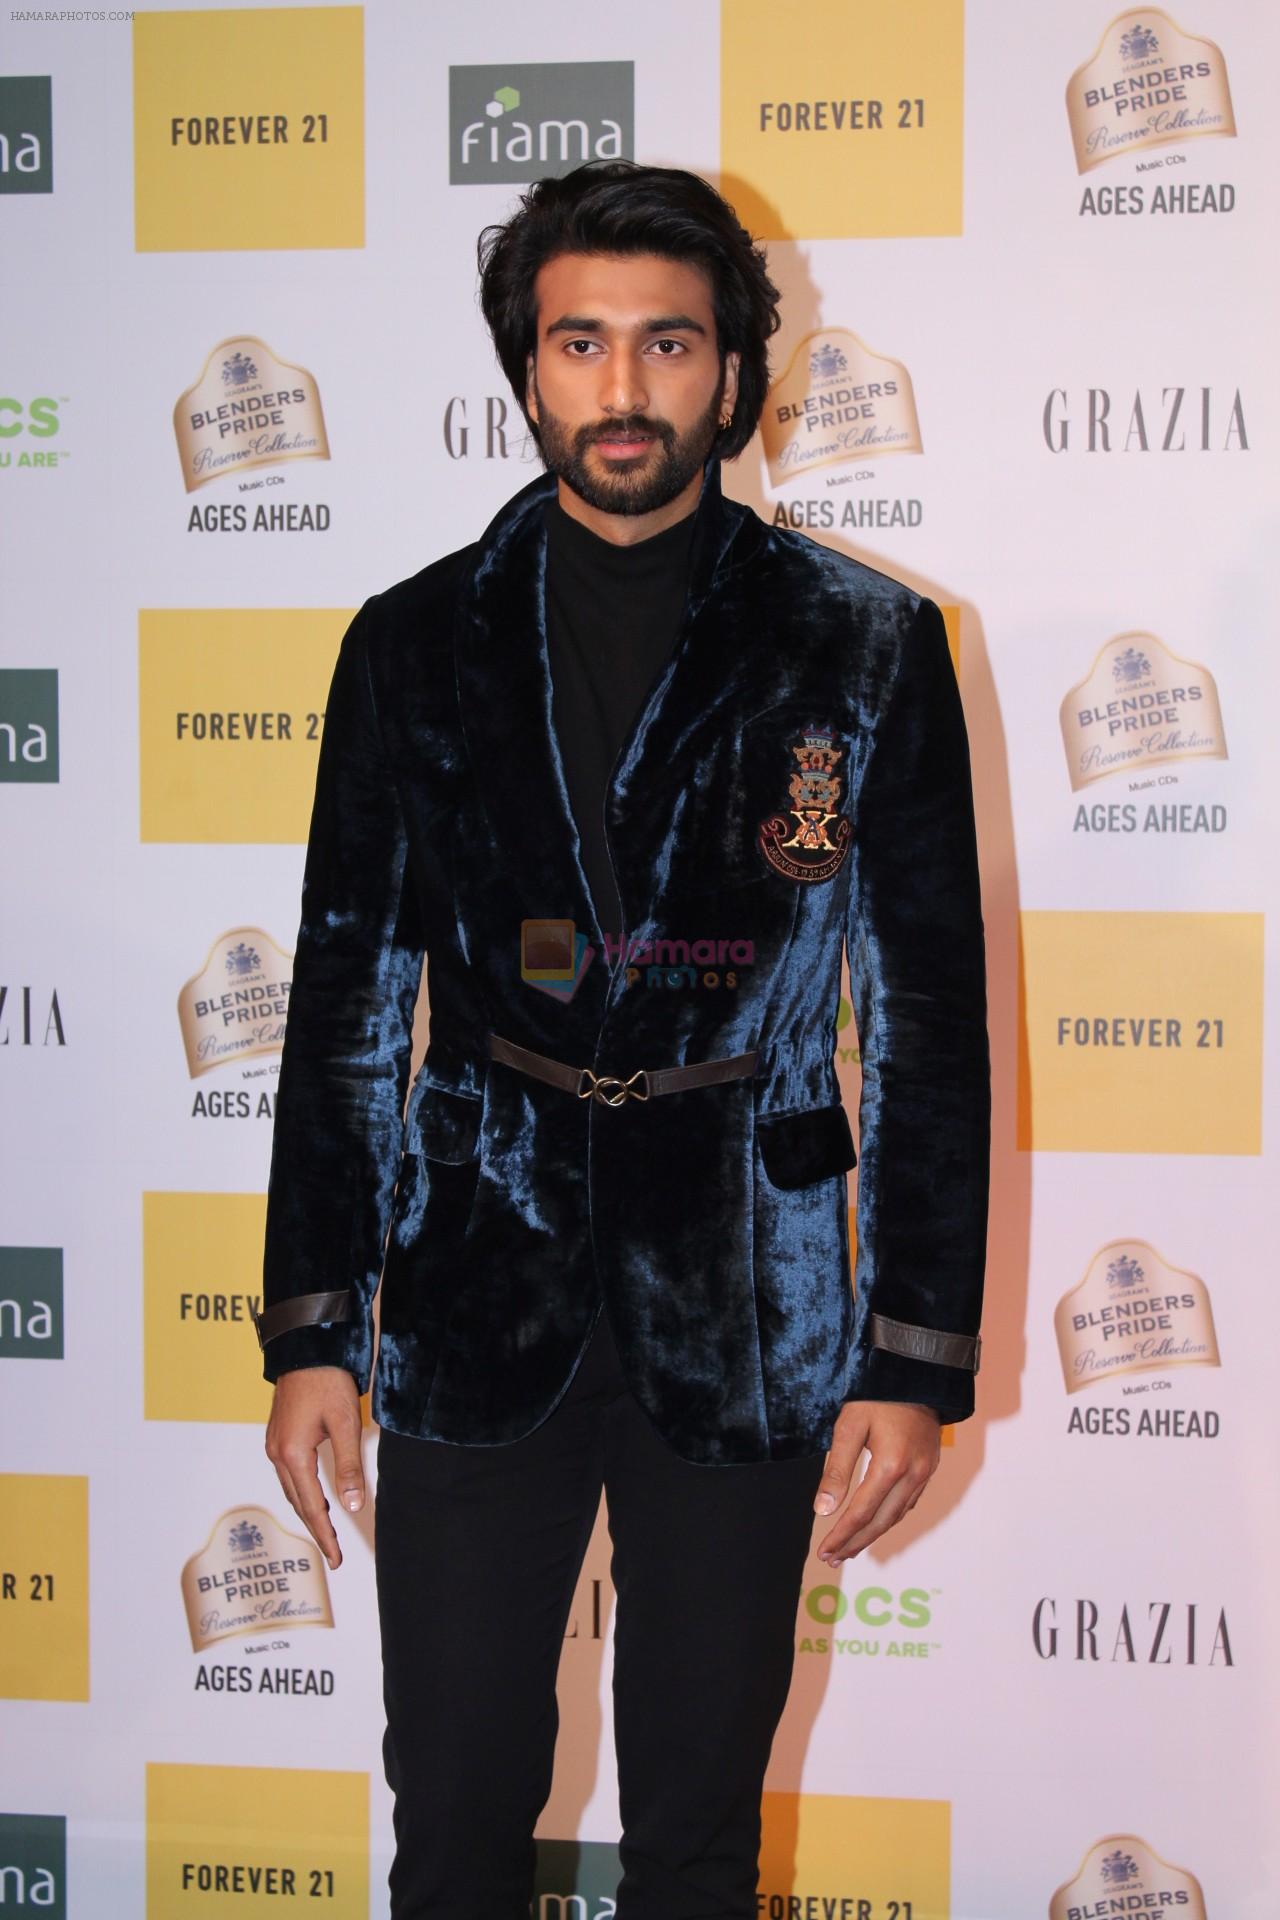 at the Red Carpet of 1st Edition of Grazia Millennial Awards on 19th June 2019 on 19th June 2019